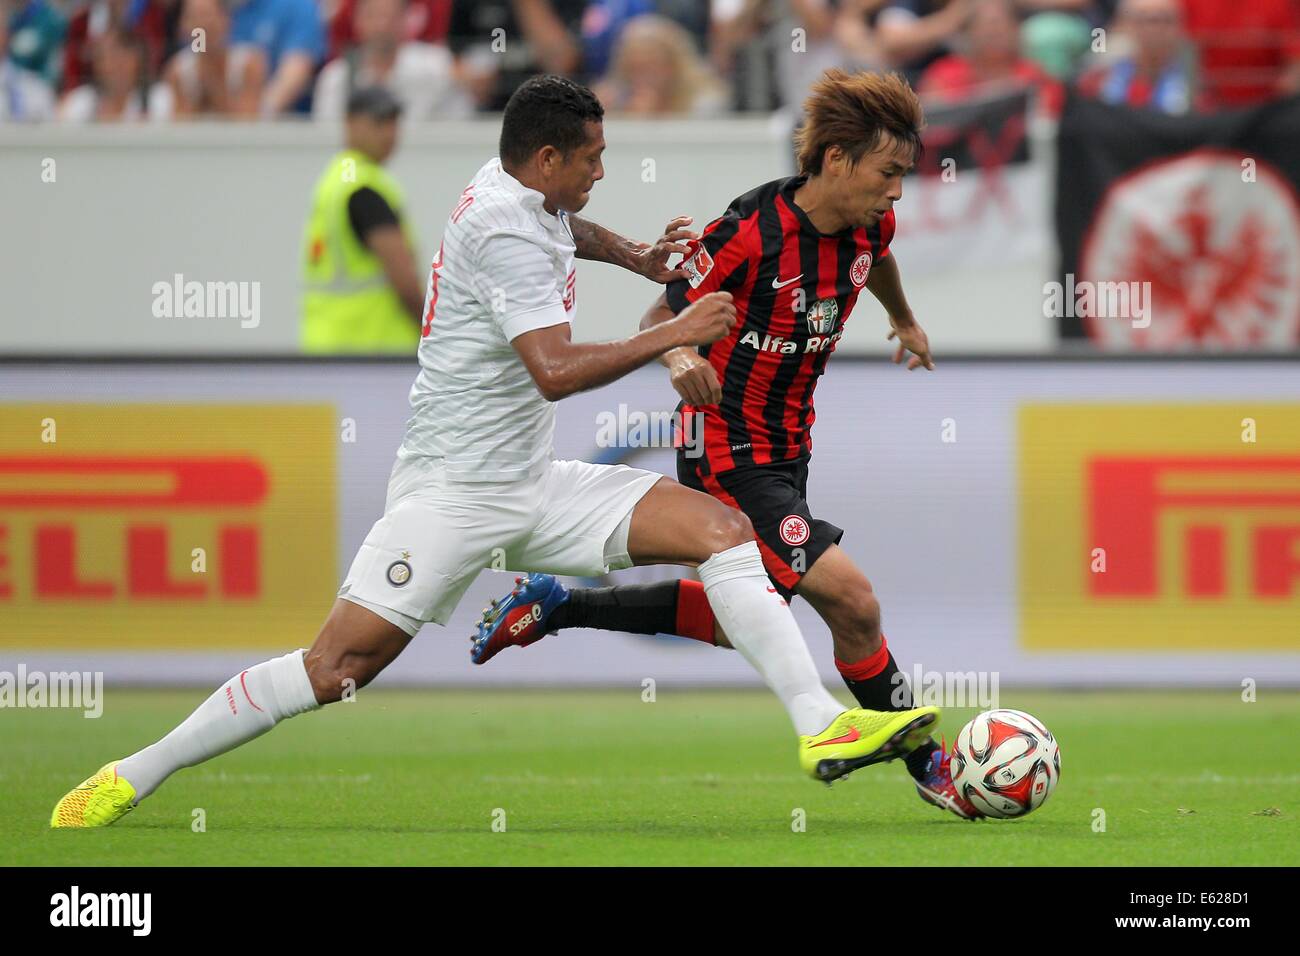 Frankfurt Main, Germany. 10th Aug, 2014. Frankfurt's Takashi Inui (R) and Milan's Fredy Guarin (L) in action during the soccer test match between Eintracht Frankfurt and Inter Milan at Commerzbank-Arena in Frankfurt Main, Germany, 10 August 2014. Frankfurt won the match 3-1. Photo: FREDRIK VON ERICHSEN/DPA/Alamy Live News Stock Photo